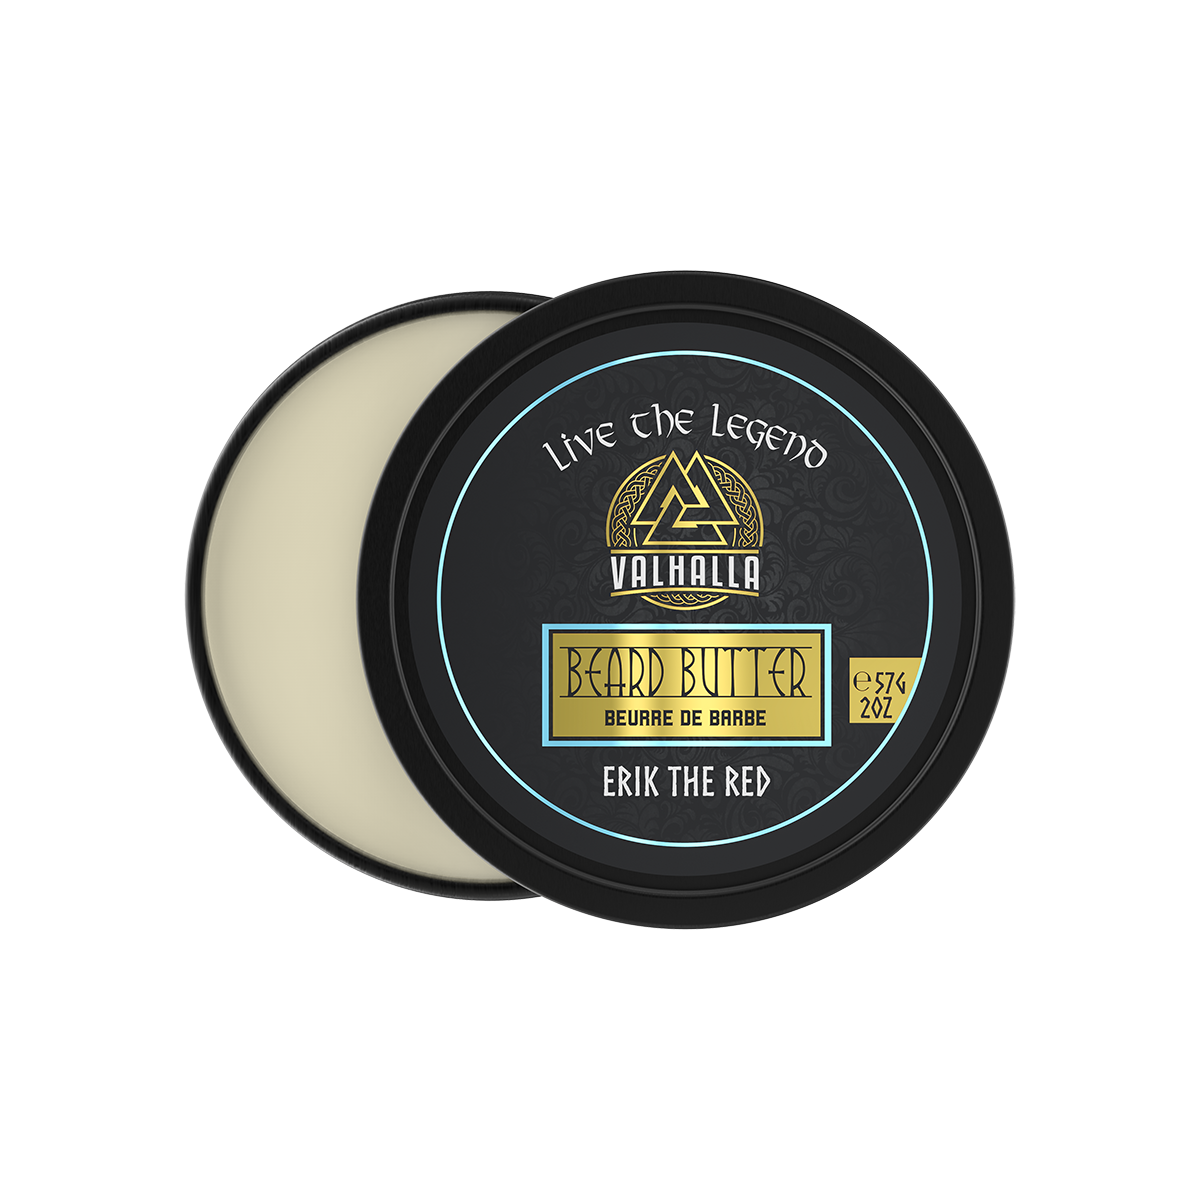 Erik the Red Beard Butter by Valhalla Legend - warrior grade beard care made in Canada